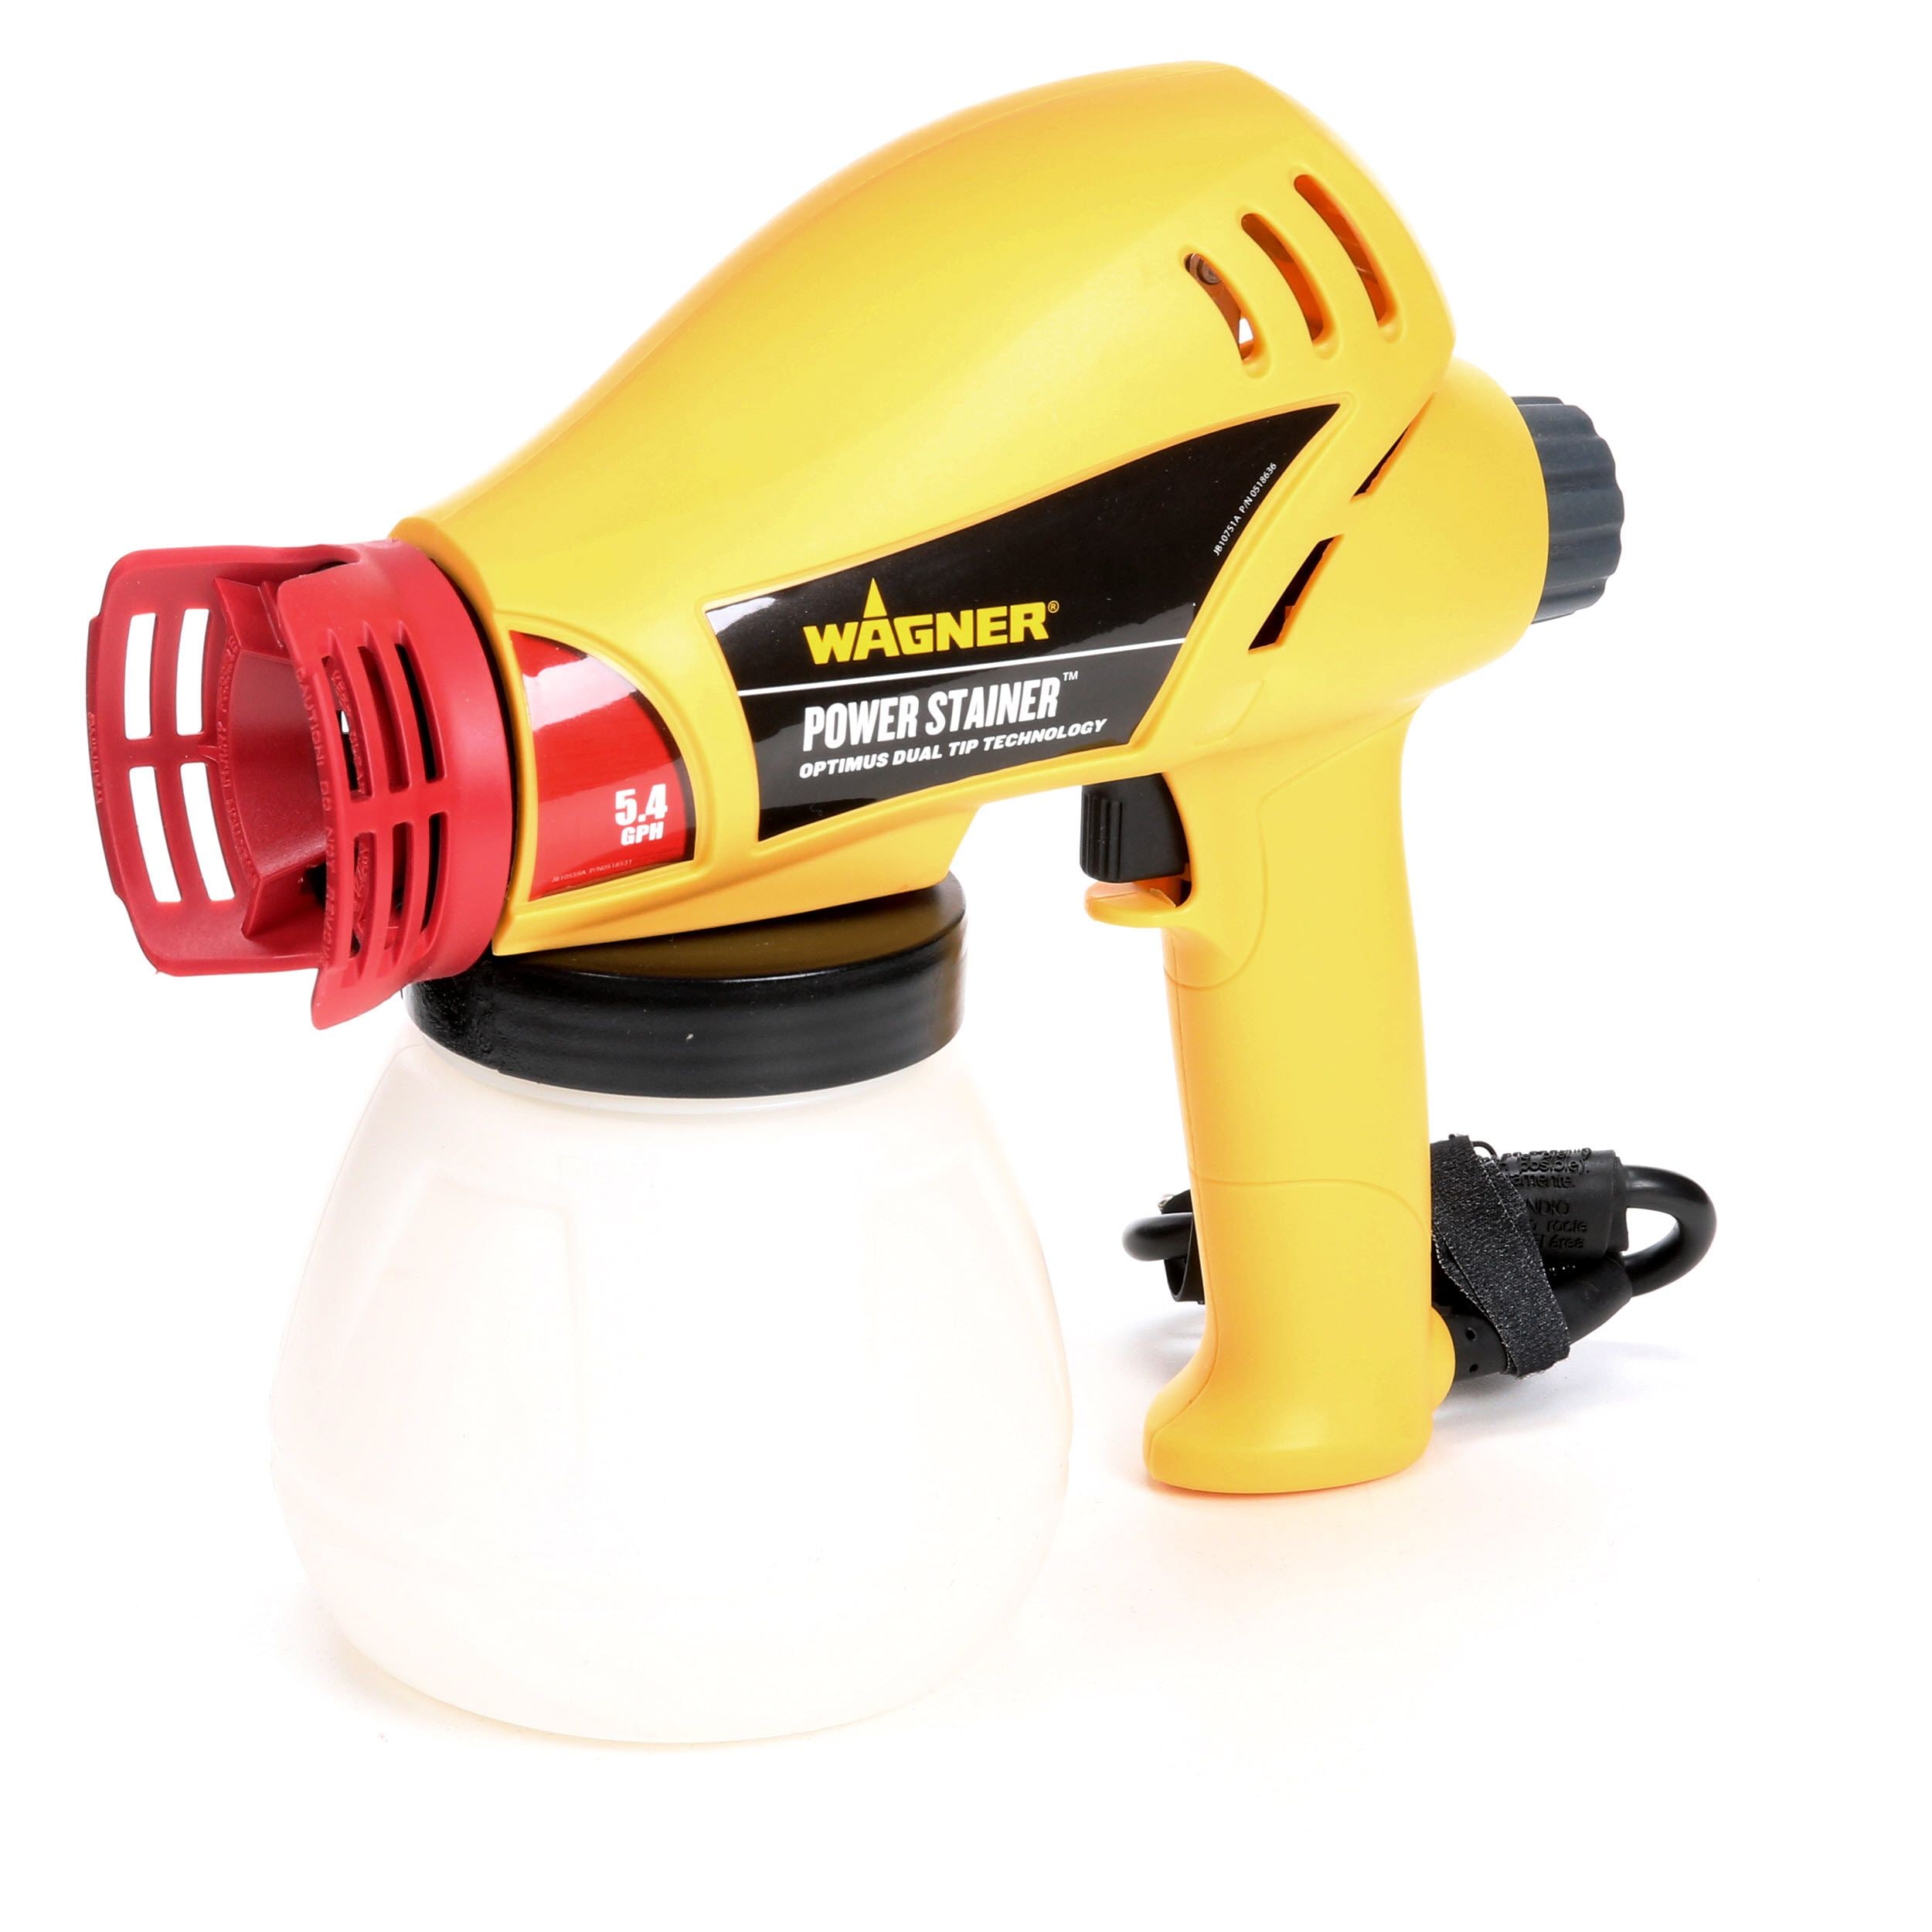 Wagner 0525047 Power Stainer Handheld Sprayer Pro-Motion Distributing Direct 